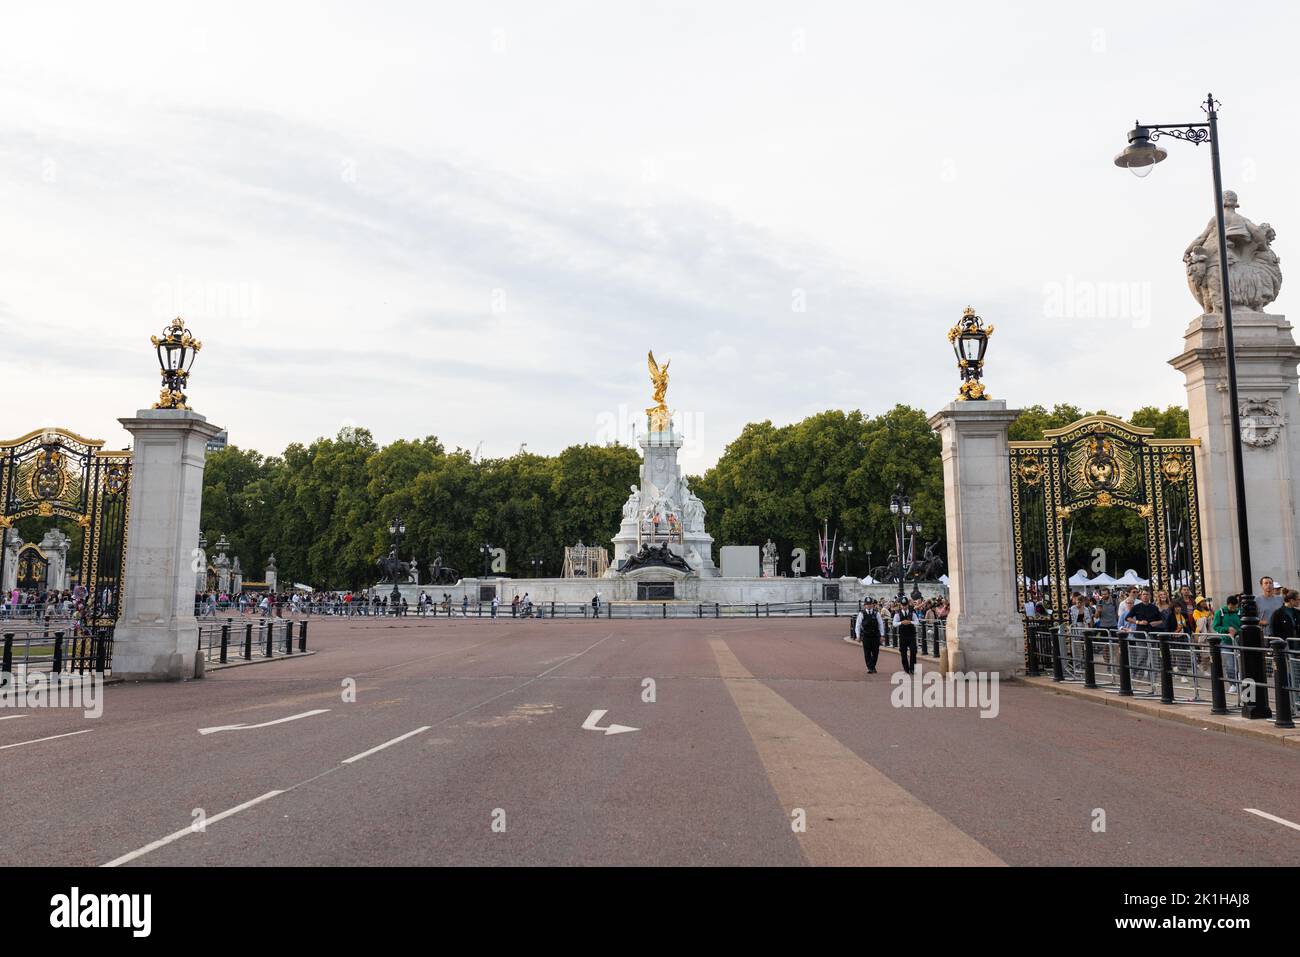 London, UK - September 11 2022: People mourning outside Buckingham Palace on the announcement of the Death of Queen Elizabeth II Stock Photo